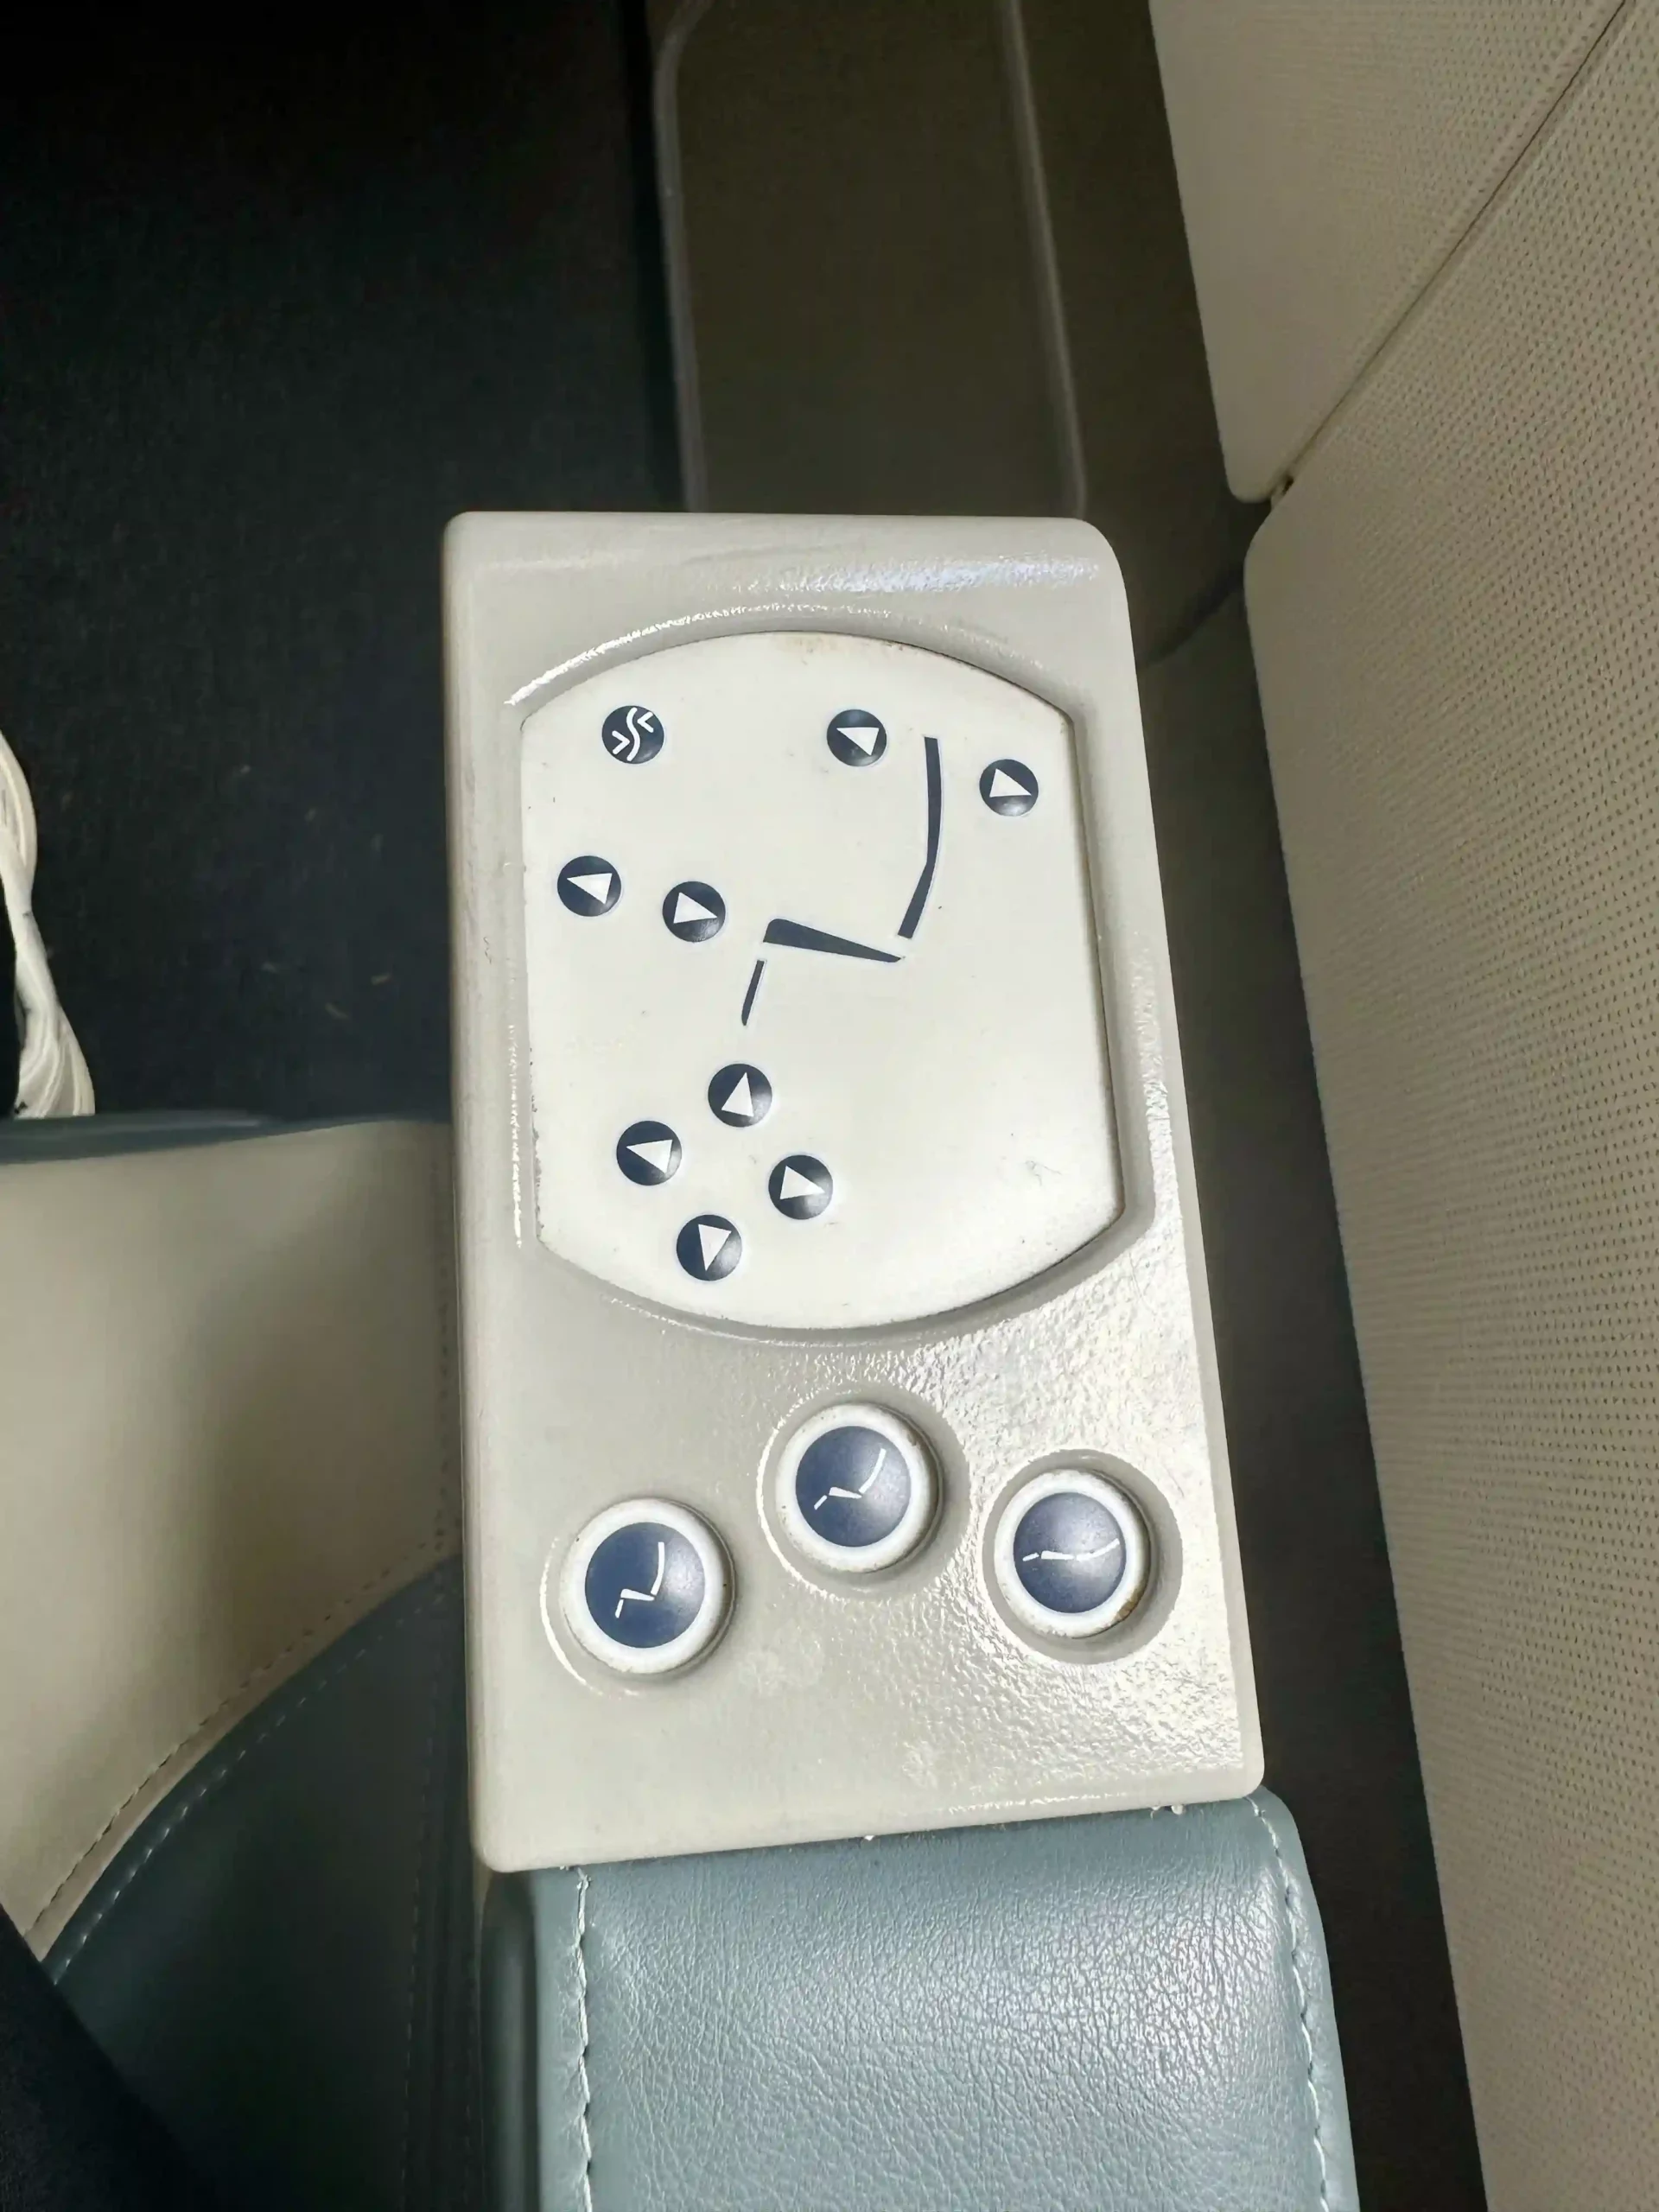 a white rectangular object with buttons and arrows